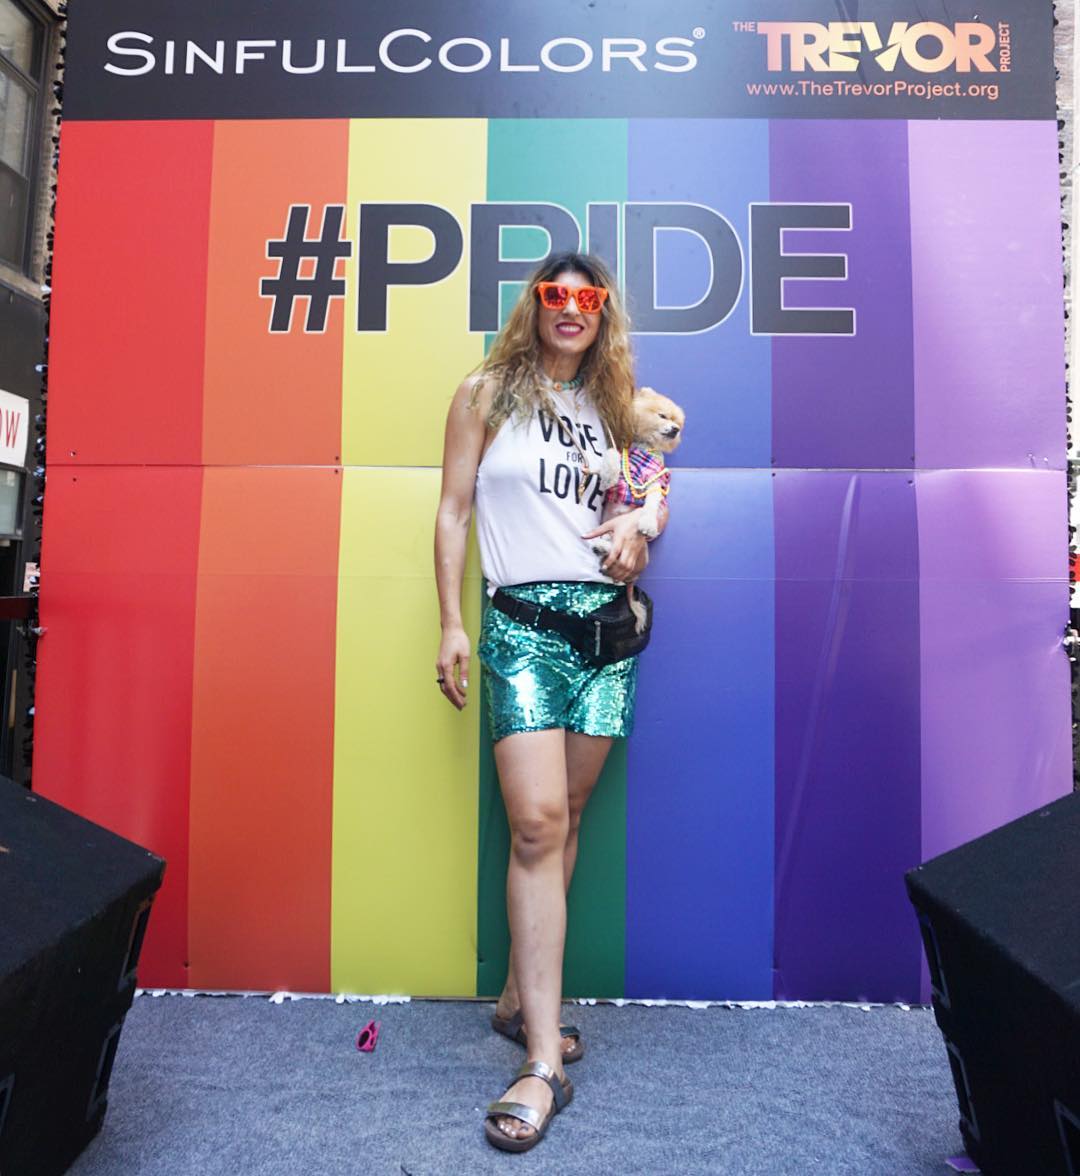 So excited to be on the @sinfulcolors_official #Pride float. Follow along on snapchat or scream if you see me #sinfulcolors #bucketlist